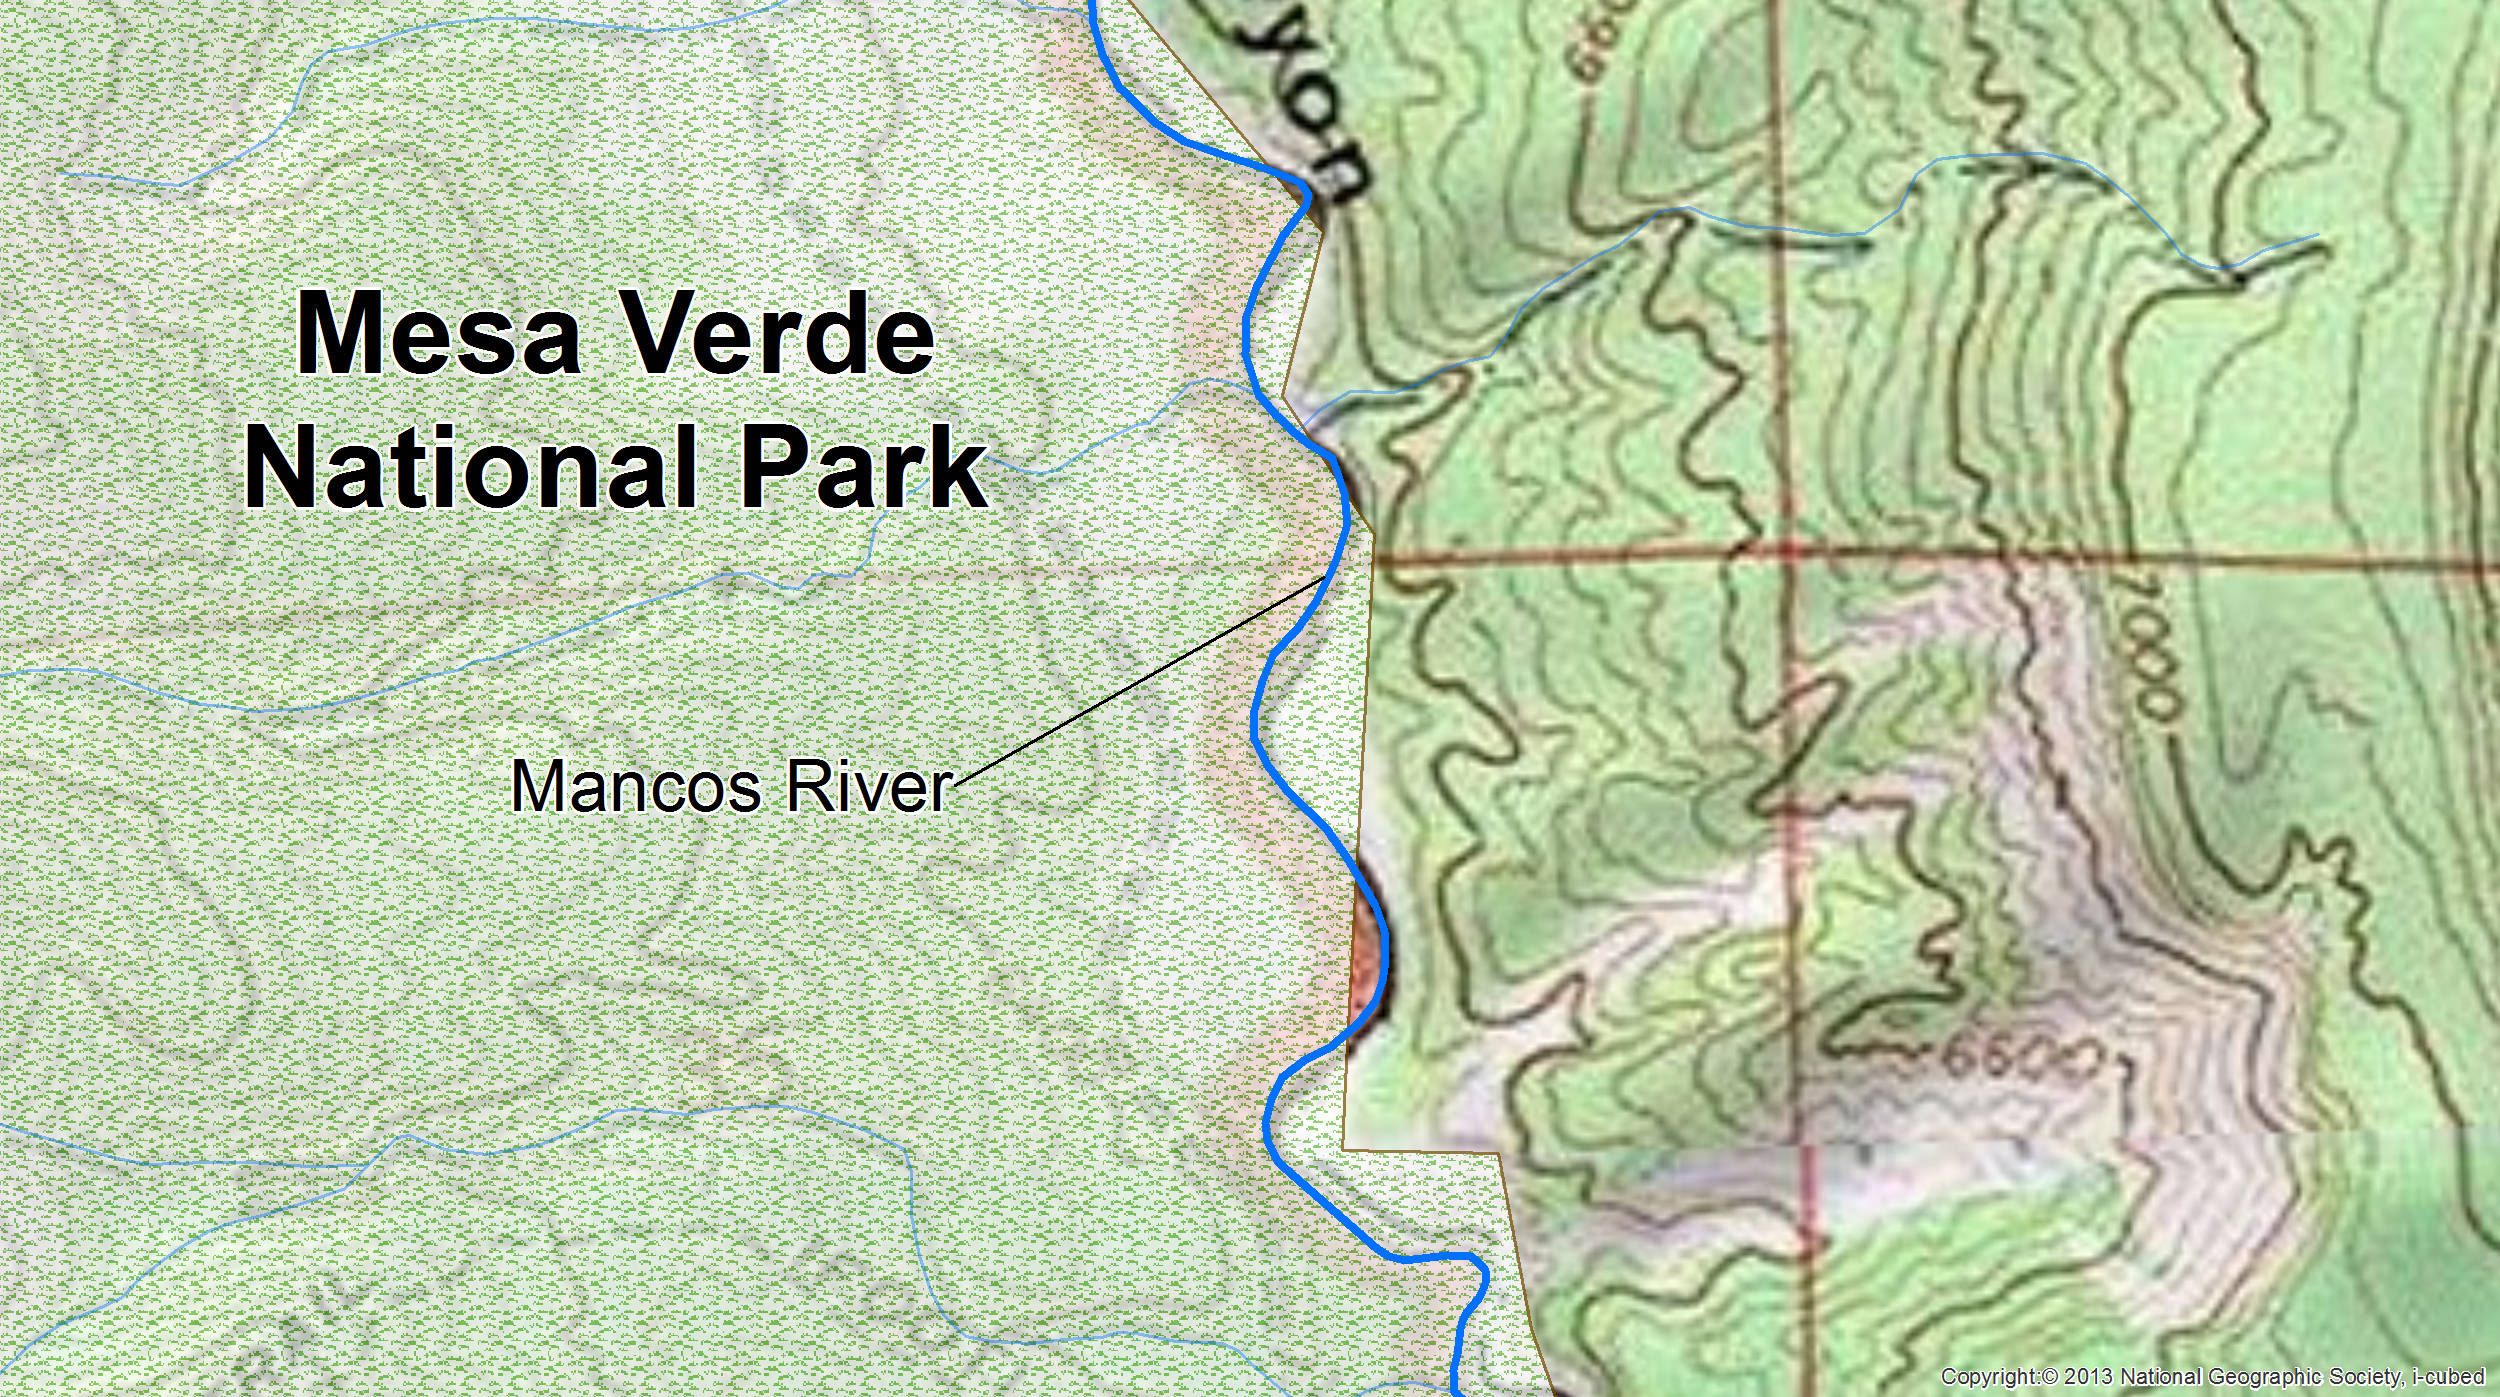 The Mancos River (blue) is contiguous with the Mesa Verde National Park boundary and therefore, marked as adjacent.